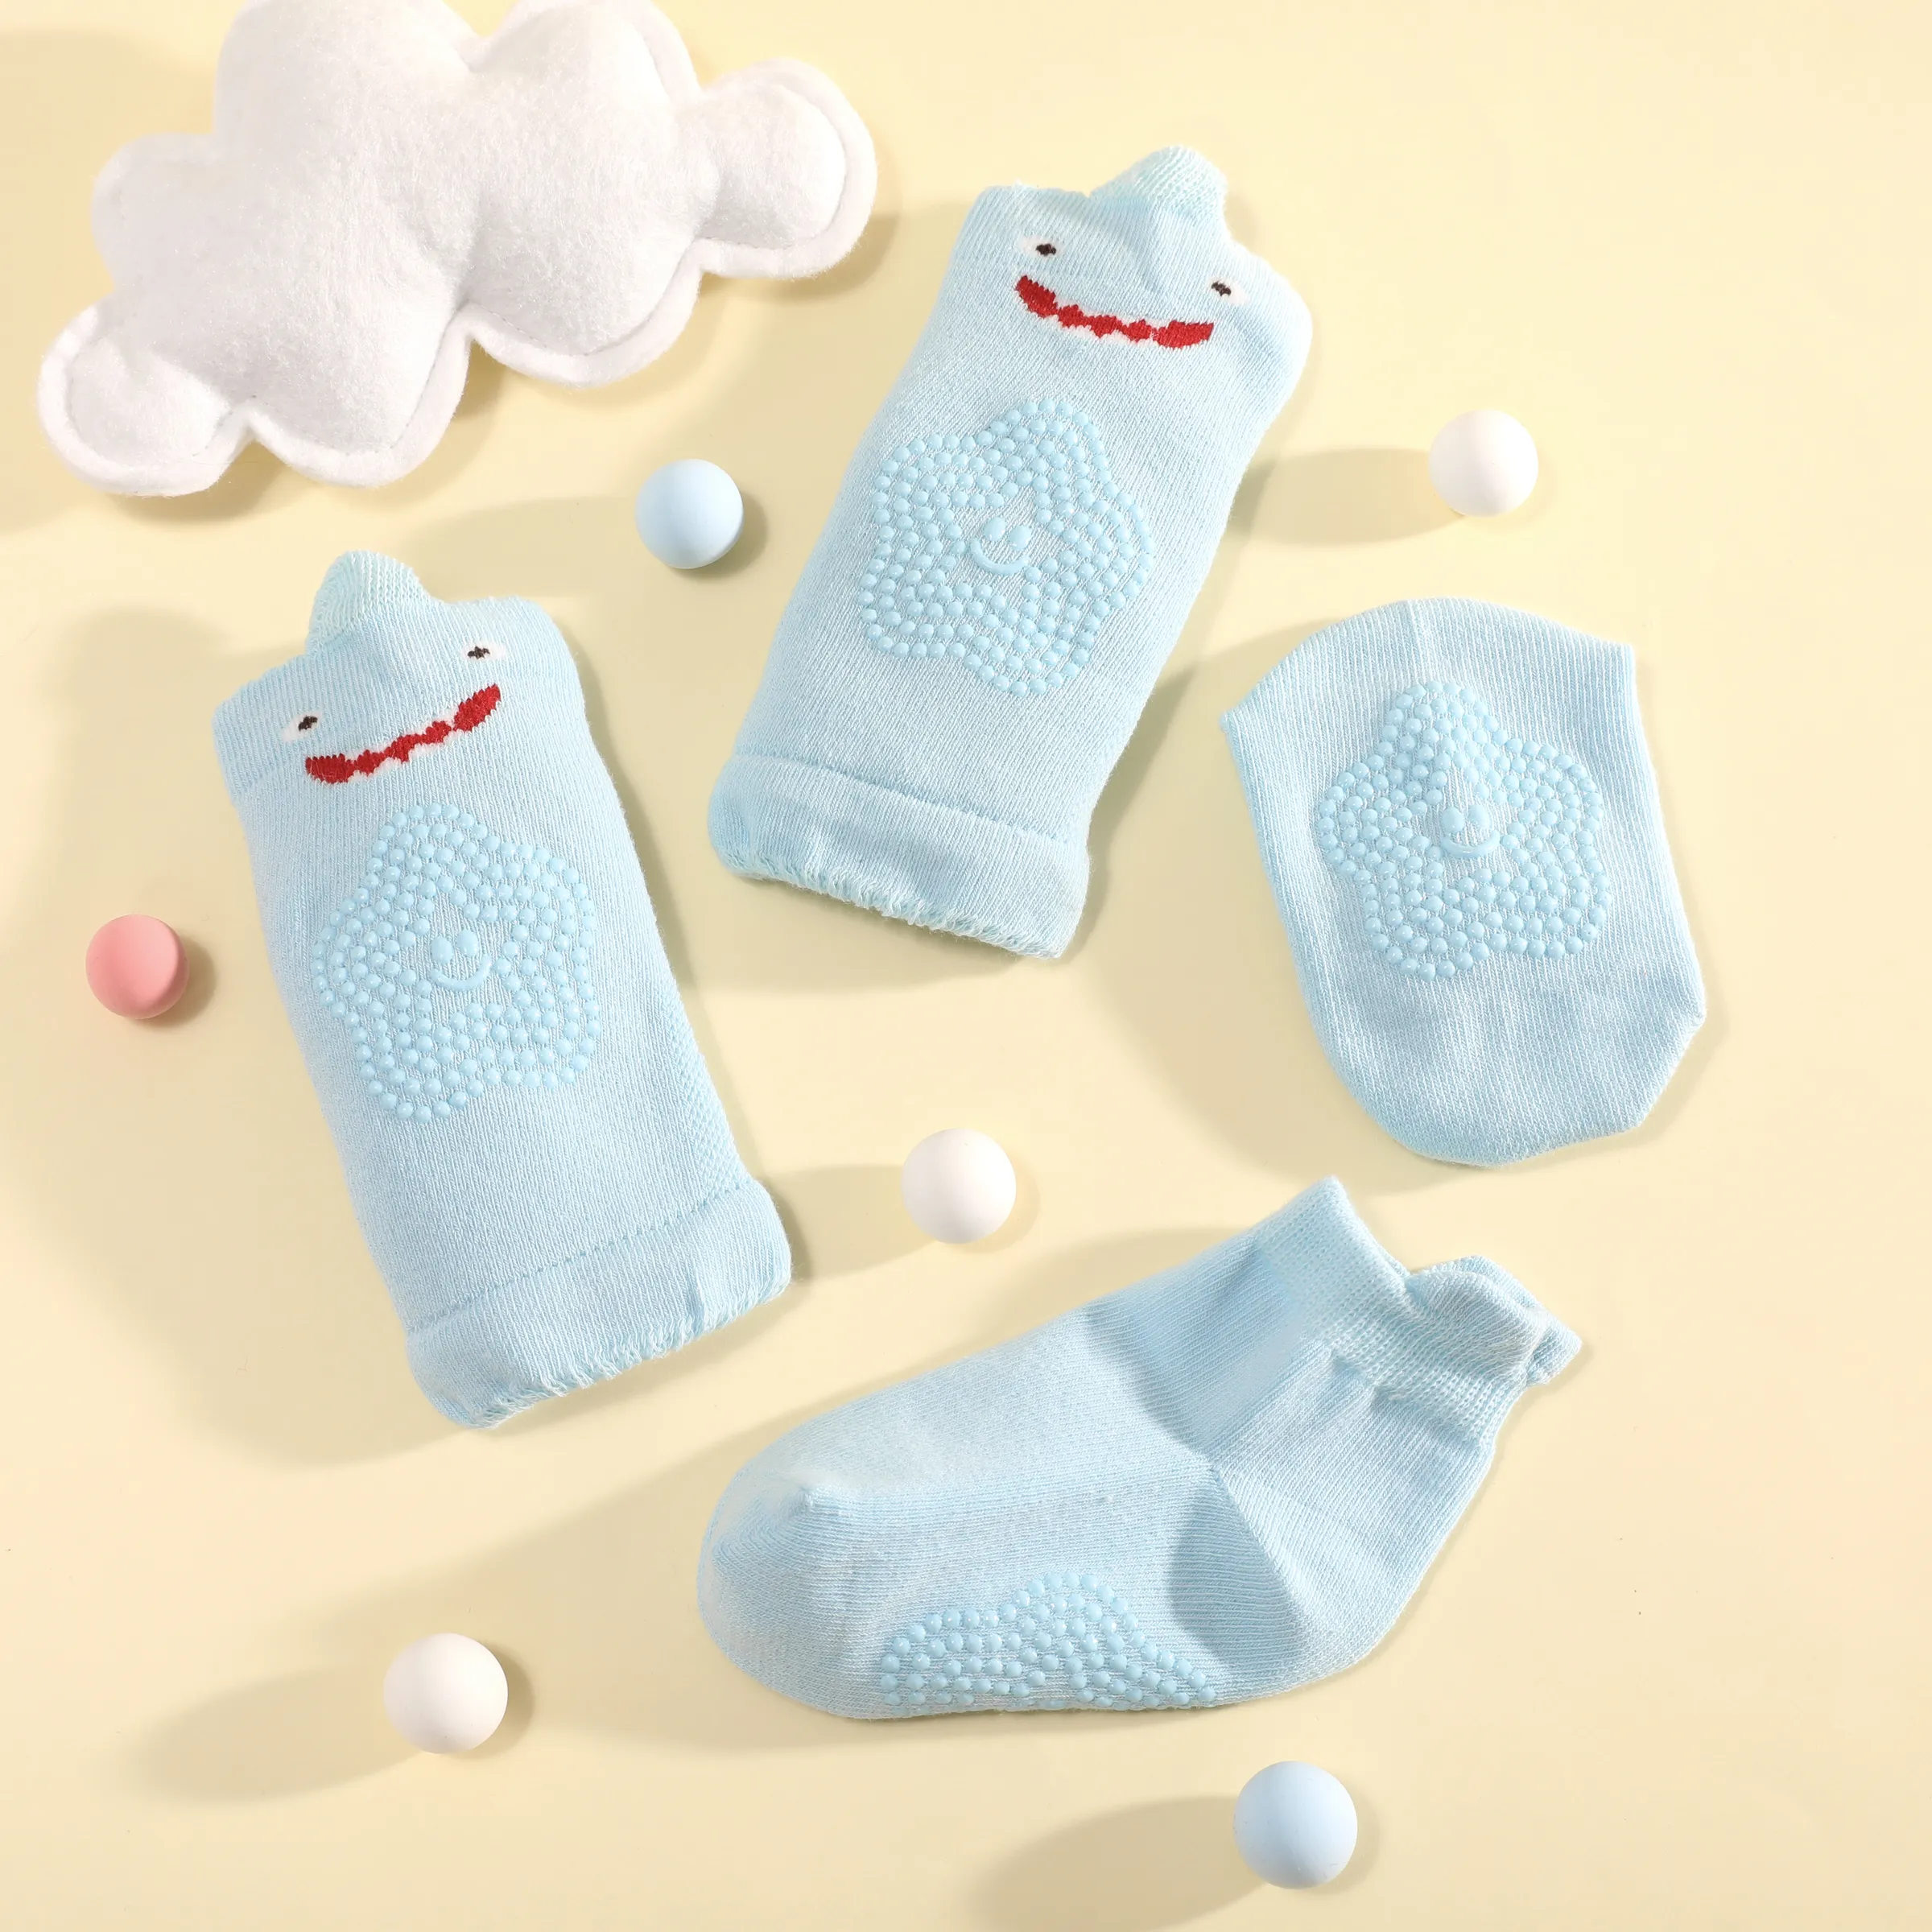 

Baby Cloud Pattern Knee Pads for Crawling, Anti-Slip and Protective